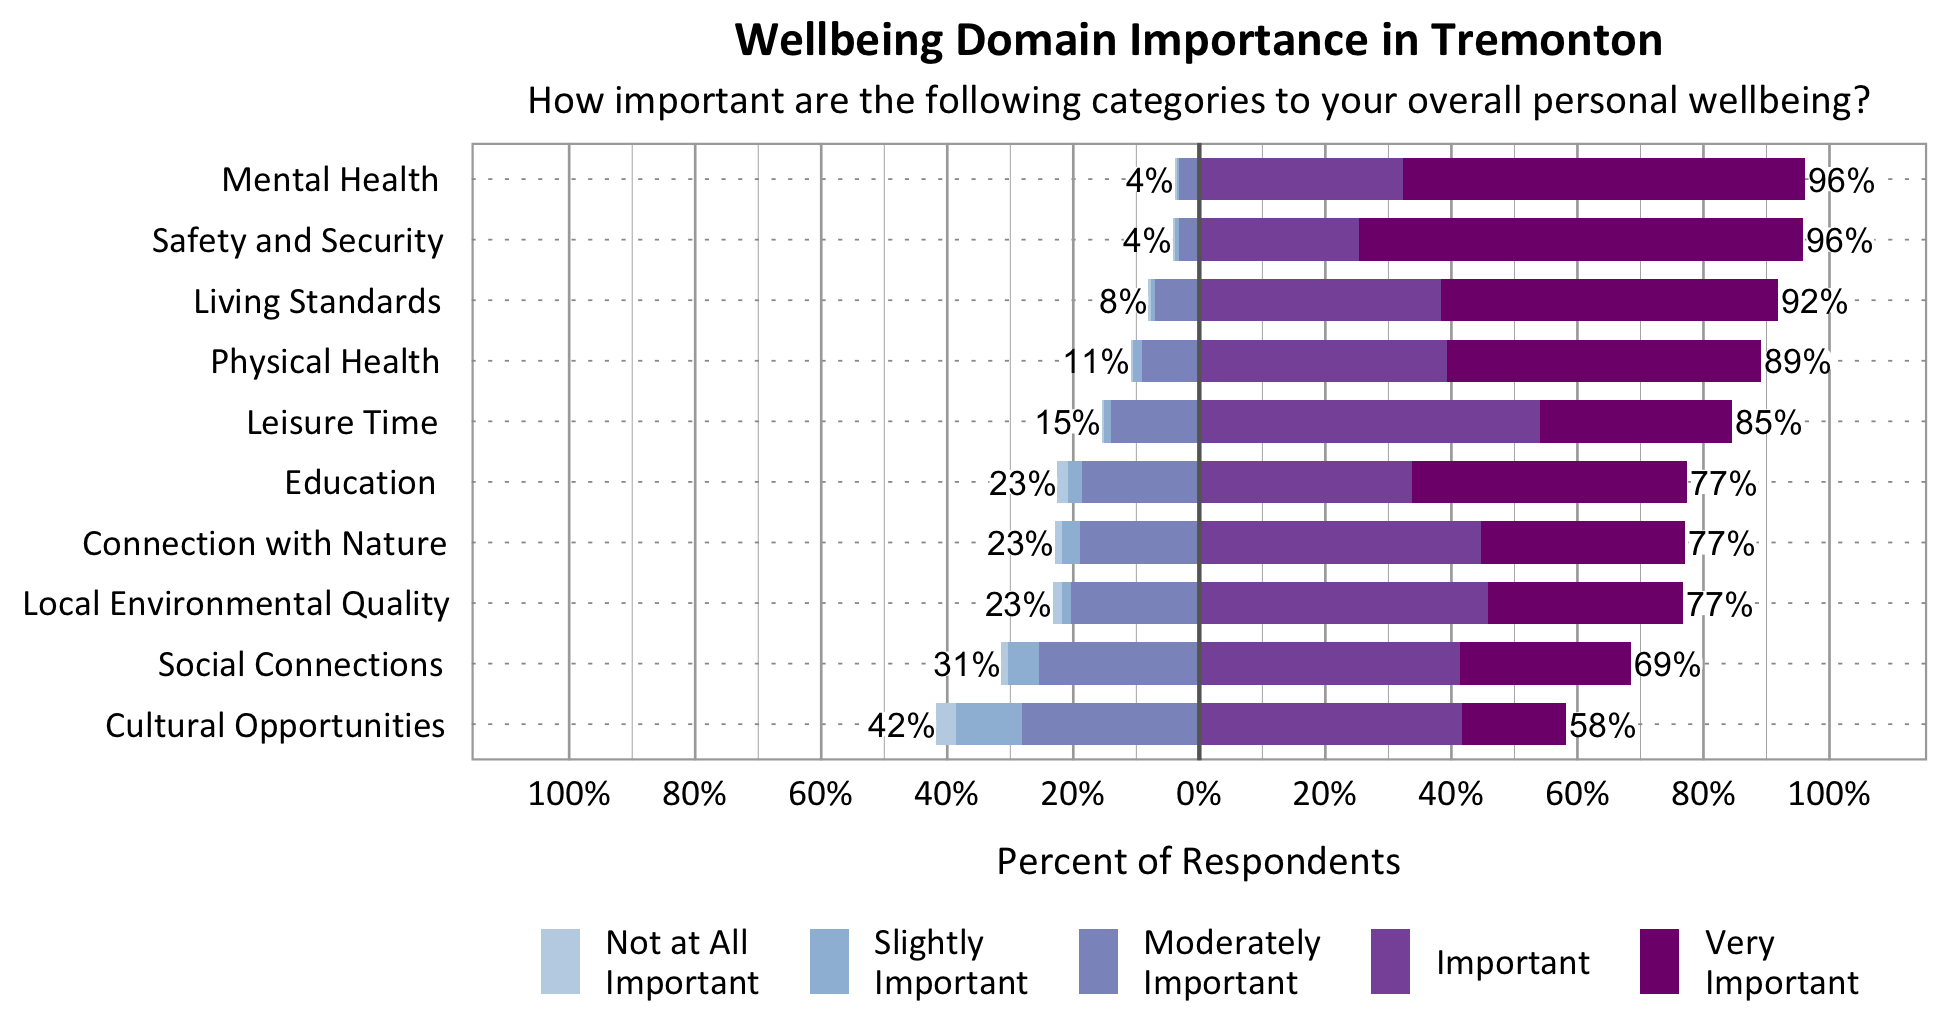 Likert Graph. Title: Wellbeing Domain Importance in Tremonton. Subtitle: How important are the following categories to your overall personal wellbeing? Category: Safety and Security - 4% of respondents rated as not at all important, slightly important, or moderately important while 96% rated as important or very important; Category: Mental Health - 4% of respondents rated as not at all important, slightly important, or moderately important while 96% rated as important or very important; Category: Physical Health - 11% of respondents rated as not at all important, slightly important, or moderately important while 89% rated as important or very important; Category: Living Standards - 8% of respondents rated as not at all important, slightly important, or moderately important while 92% rated as important or very important; Category: Connection with Nature - 23% of respondents rated as not at all important, slightly important, or moderately important while 77% of respondents rated as important or very important; Category: Leisure Time - 15% of respondents rated as not at all important, slightly important, or moderately important while 85% rated as important or very important; Category: Local Environmental Quality - 23% of respondents rated as not at all important, slightly important, or moderately important while 77% rated as important or very important; Category: Social Connections - 31% rated as not at all important, slightly important, or moderately important while 69% rated as important or very important; Category: Education – 23% of respondents rated as not at all important, slightly important, or moderately important while 77% rated as important or very important; Category: Cultural Opportunities - 42% rated as not at all important, slightly important, or moderately important while 58% rated as important or very important.